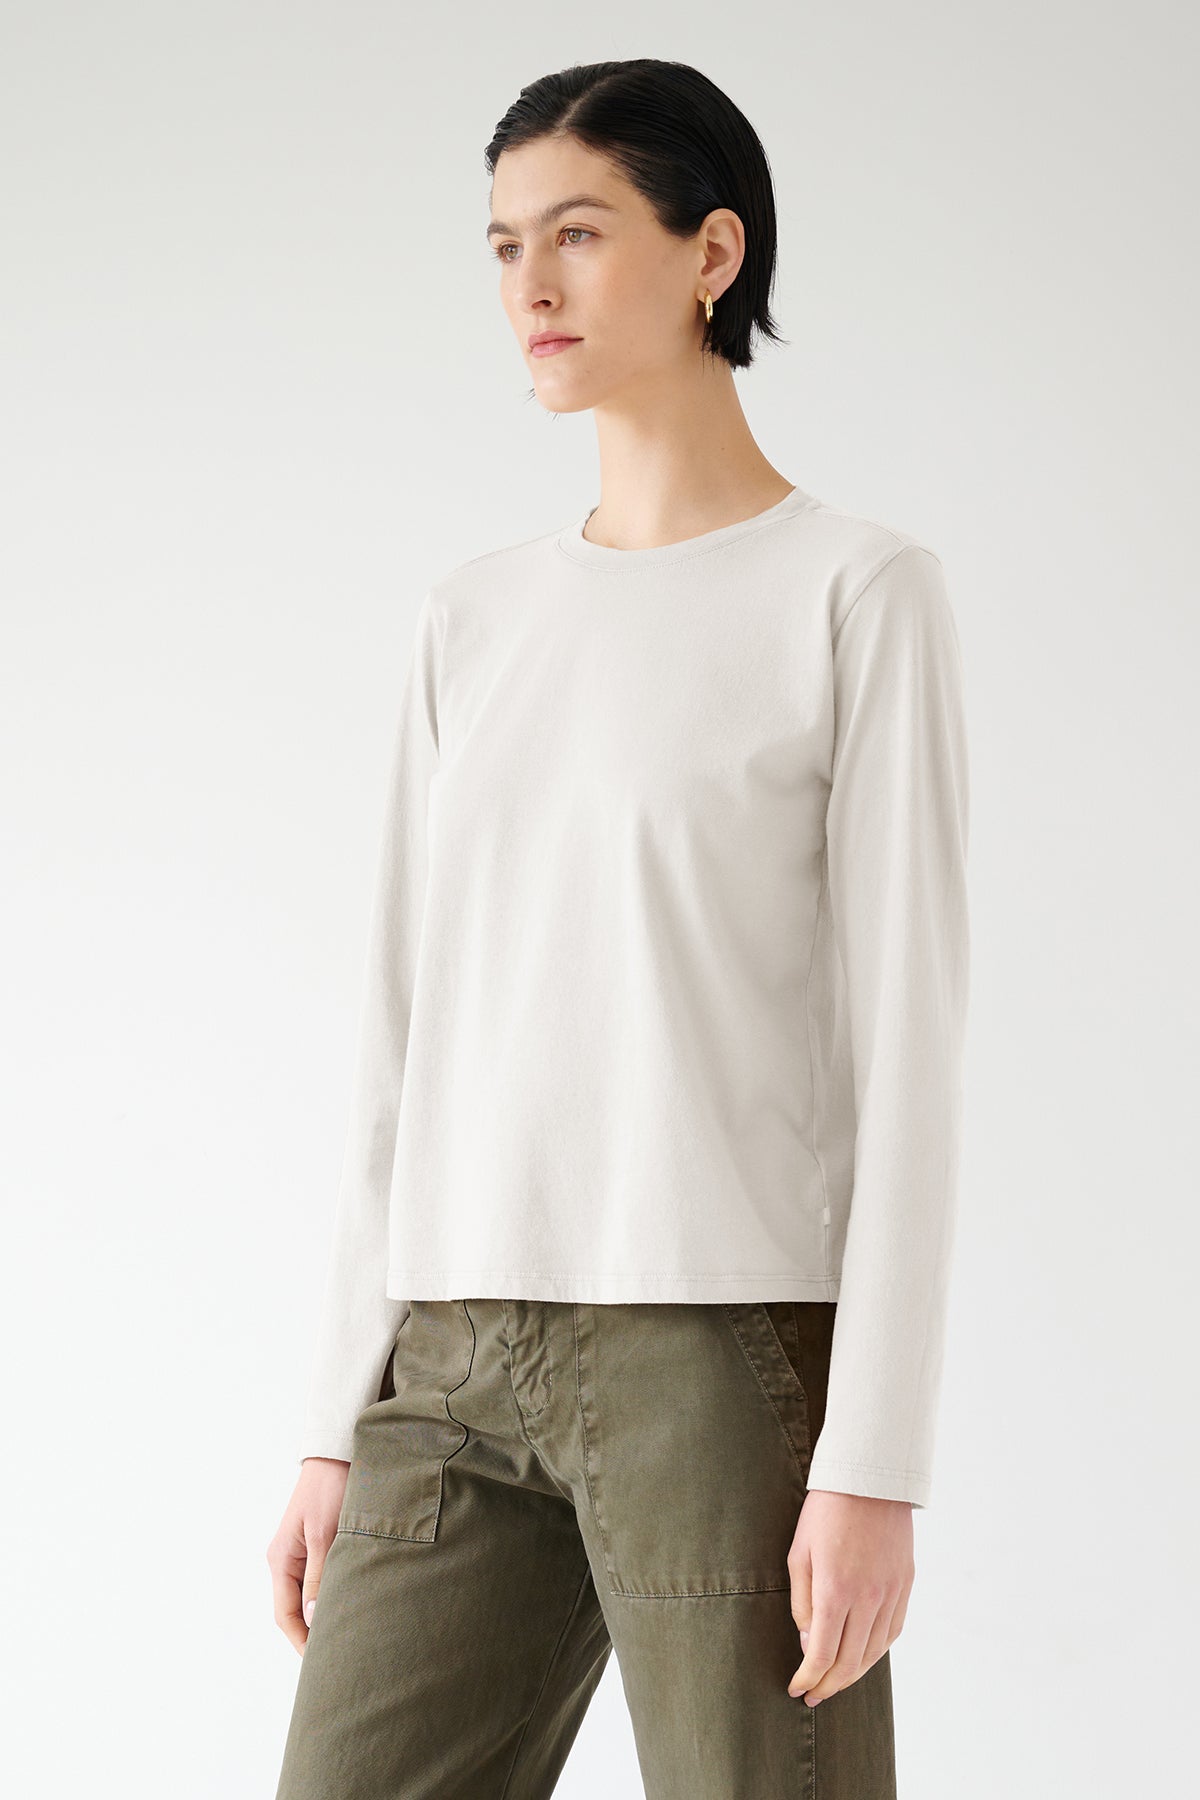   Woman in a Velvet by Jenny Graham VICENTE TEE and green pants standing against a light background. 